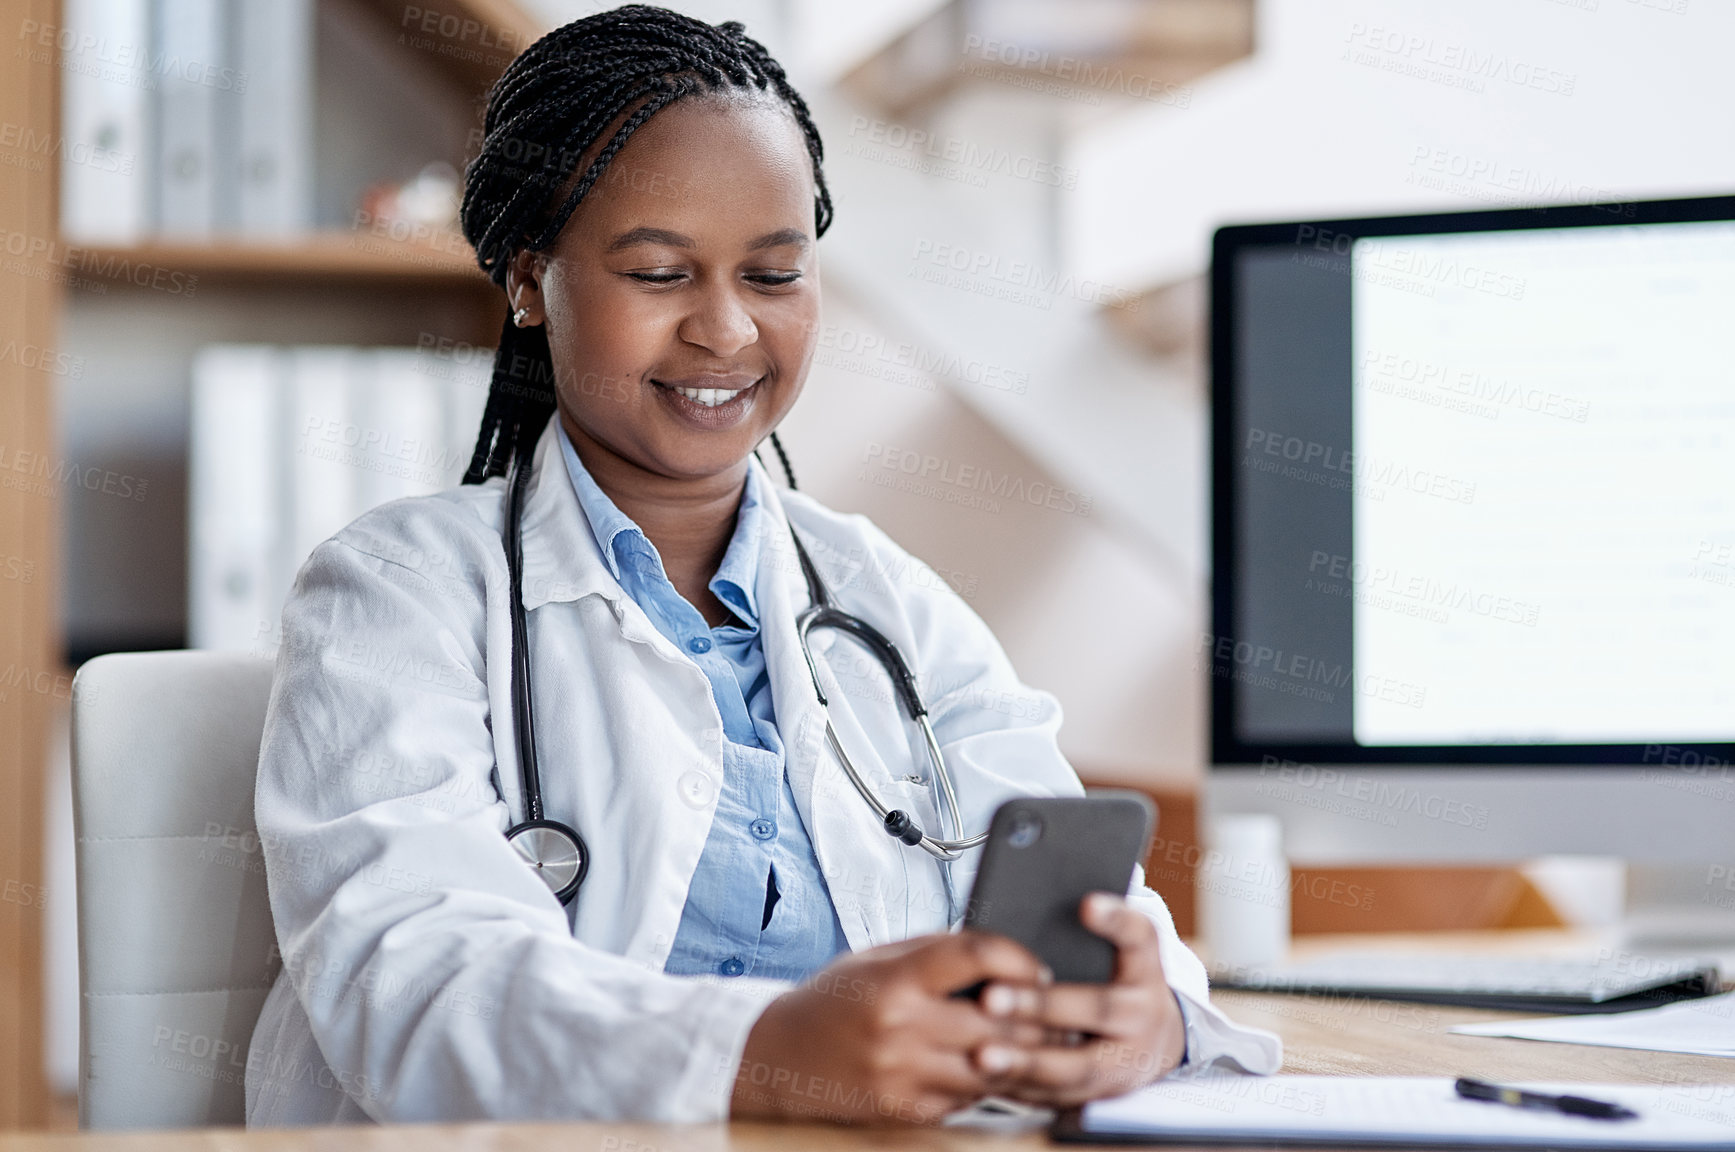 Buy stock photo Shot of a young doctor using a cellphone while working in her office